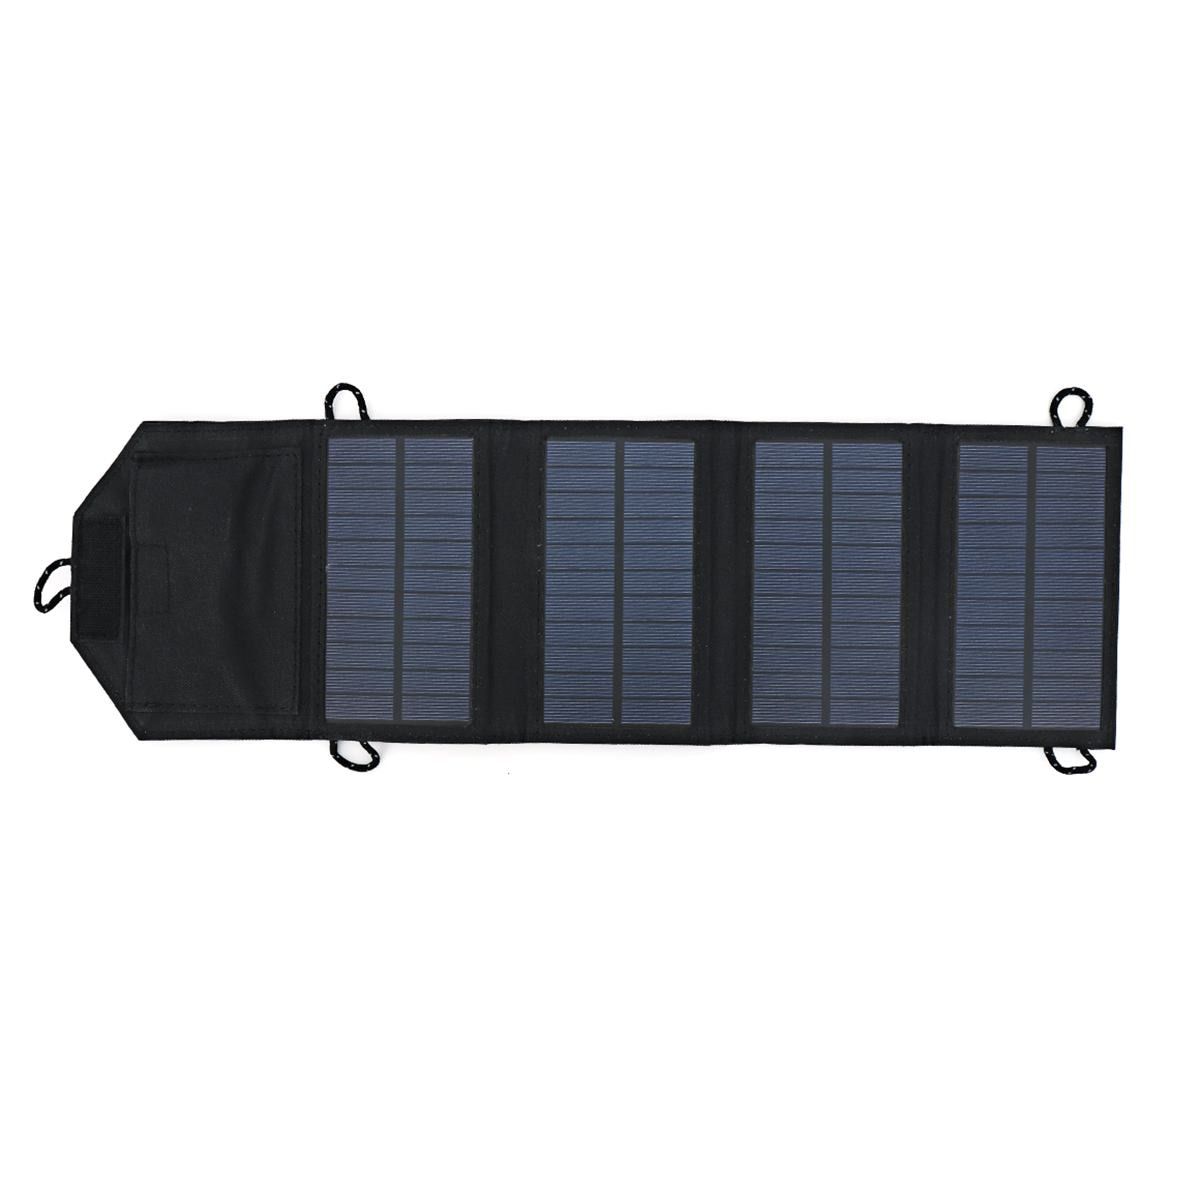 Foldable 50W Solar Panel Charger Usb Solar Battery Pack Camping And Hiking Solar Charging Device Power Supply Outdoor Indoor